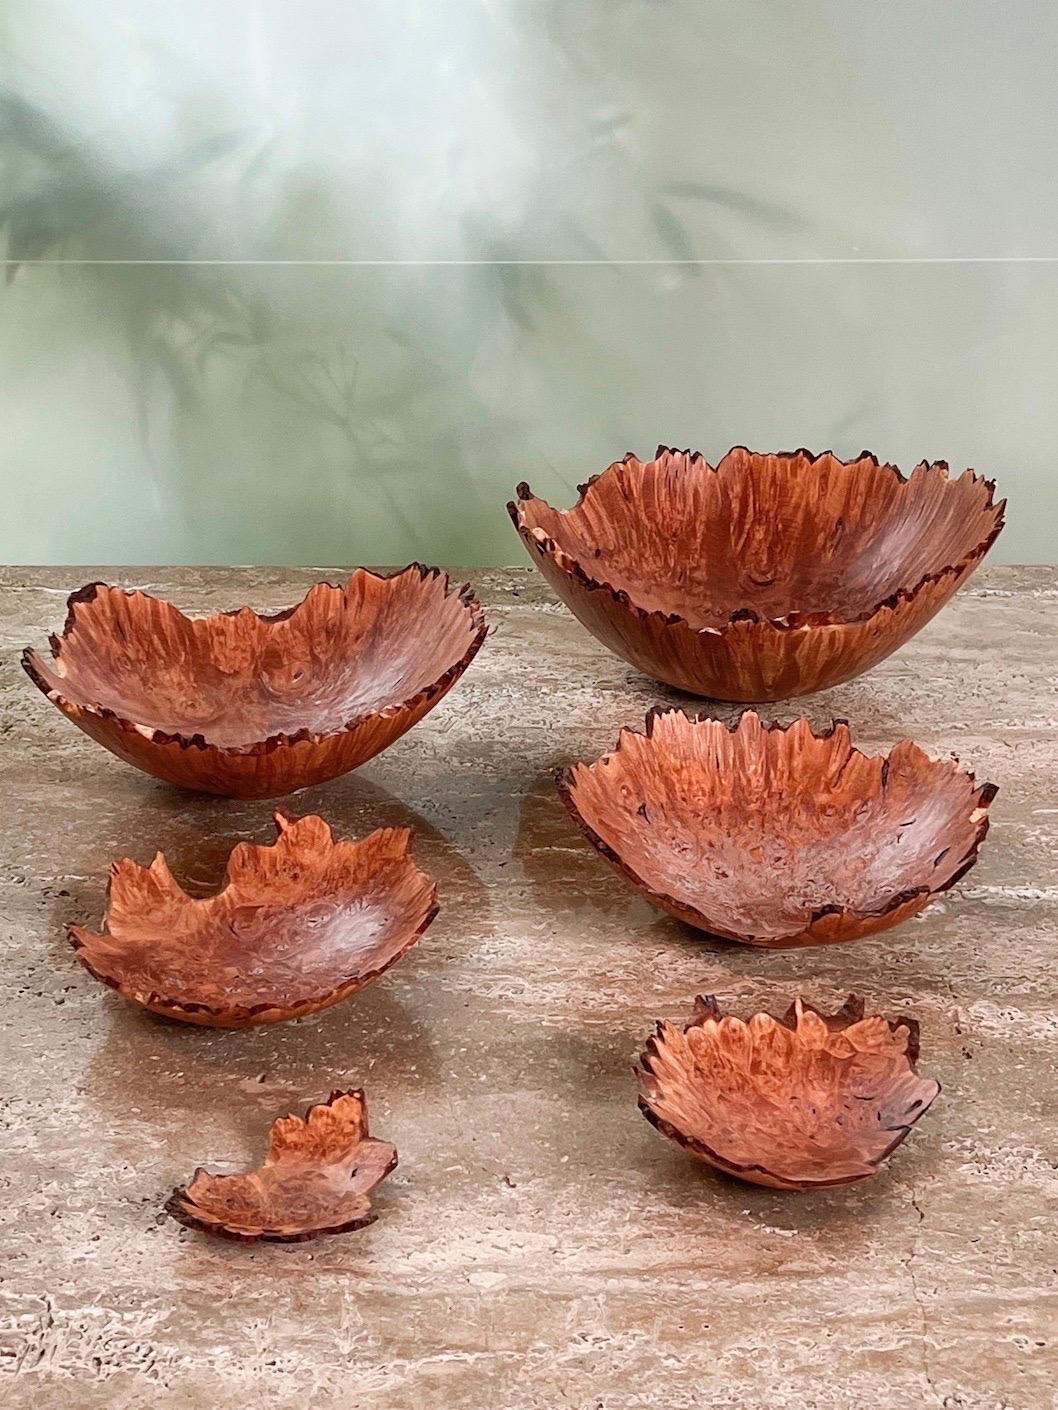 Burl Set of Wooden Nesting Bowls by Mike Mahoney 